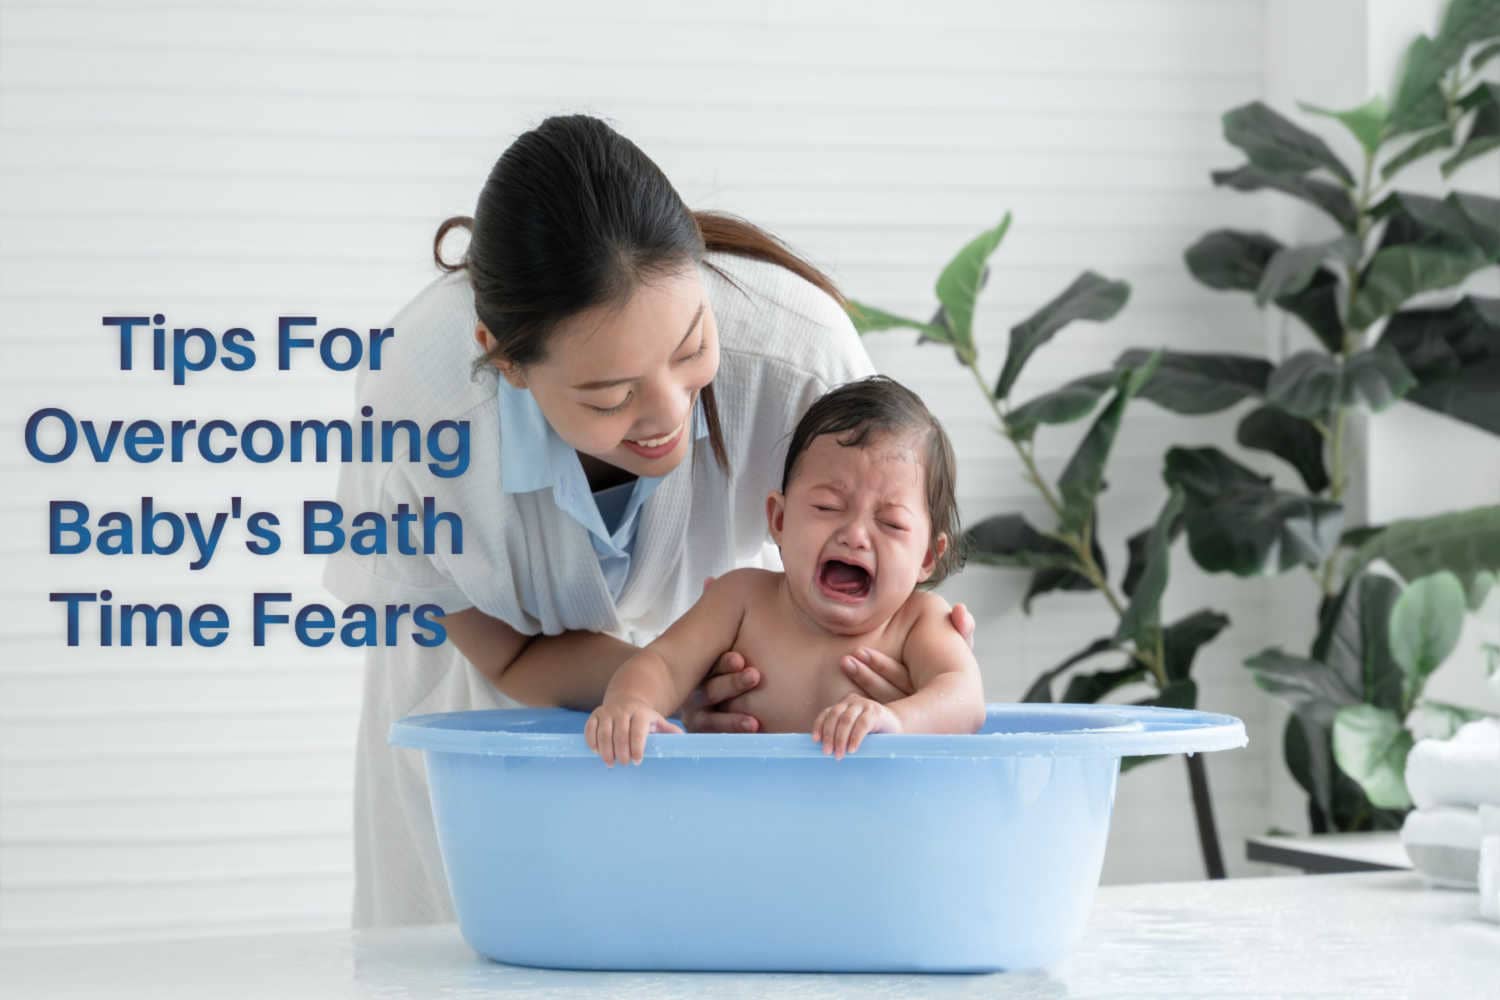 Tips For Overcoming Baby's Bath Time Fears